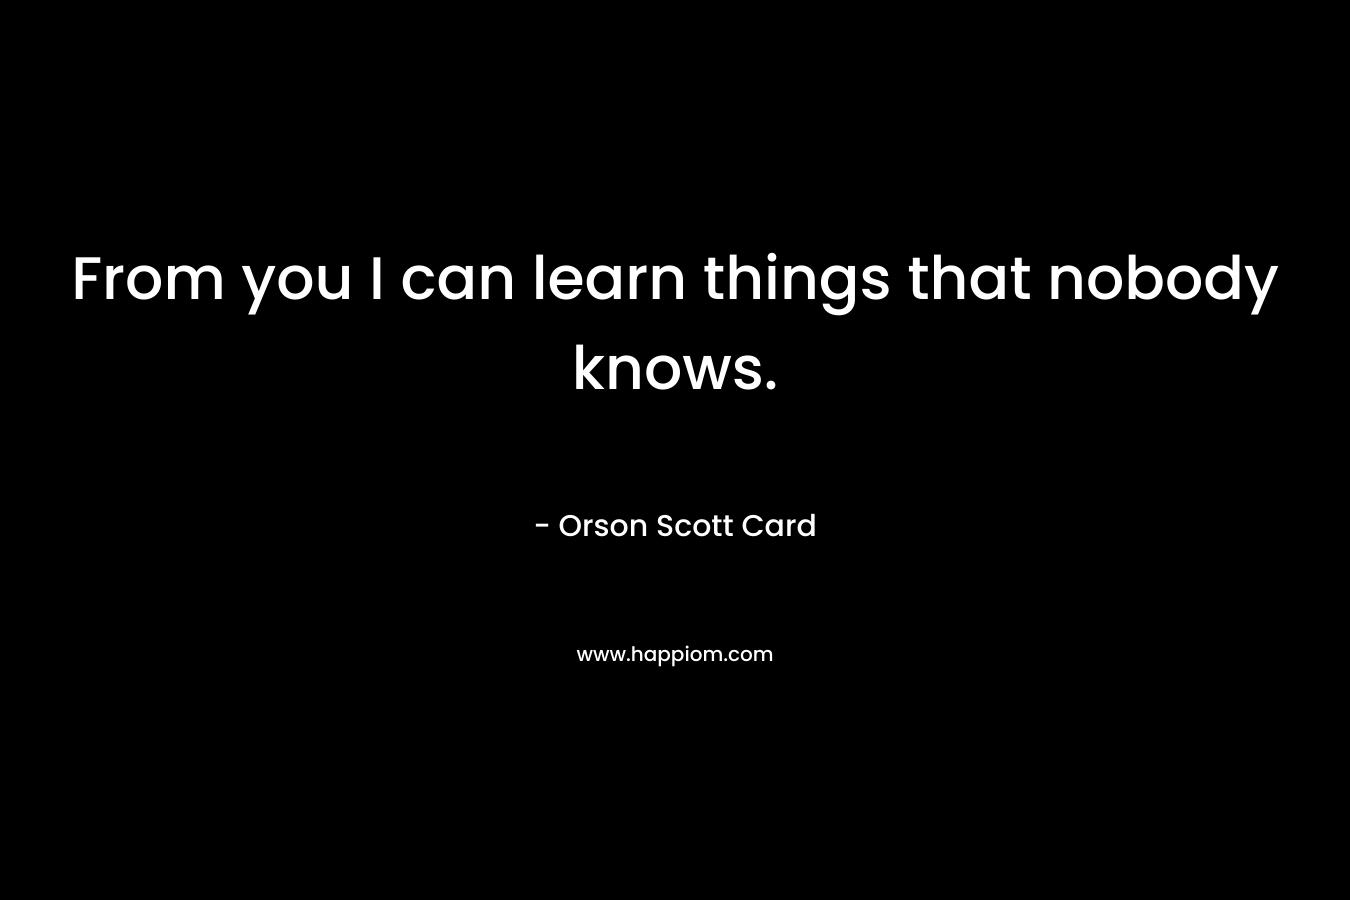 From you I can learn things that nobody knows.